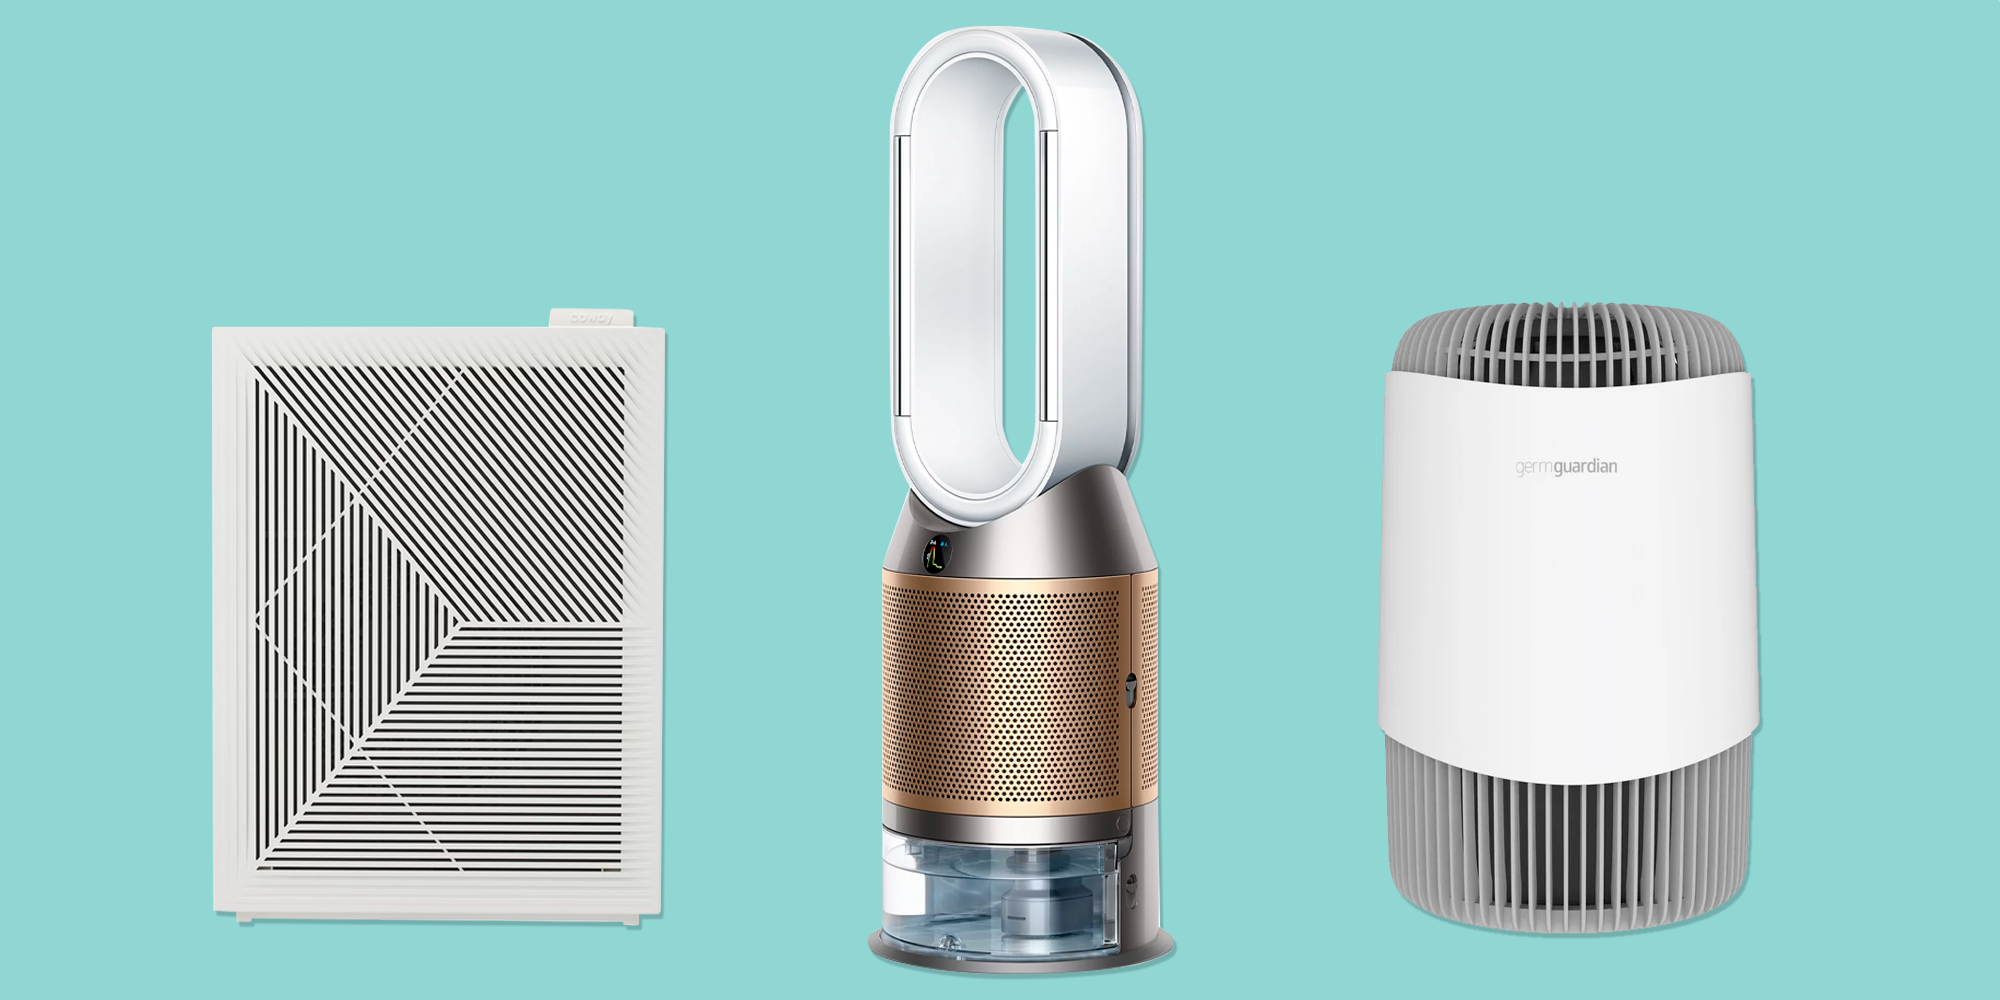 Best Air Purifiers 2024: top air filters to reduce pollutants in your home  - Which?